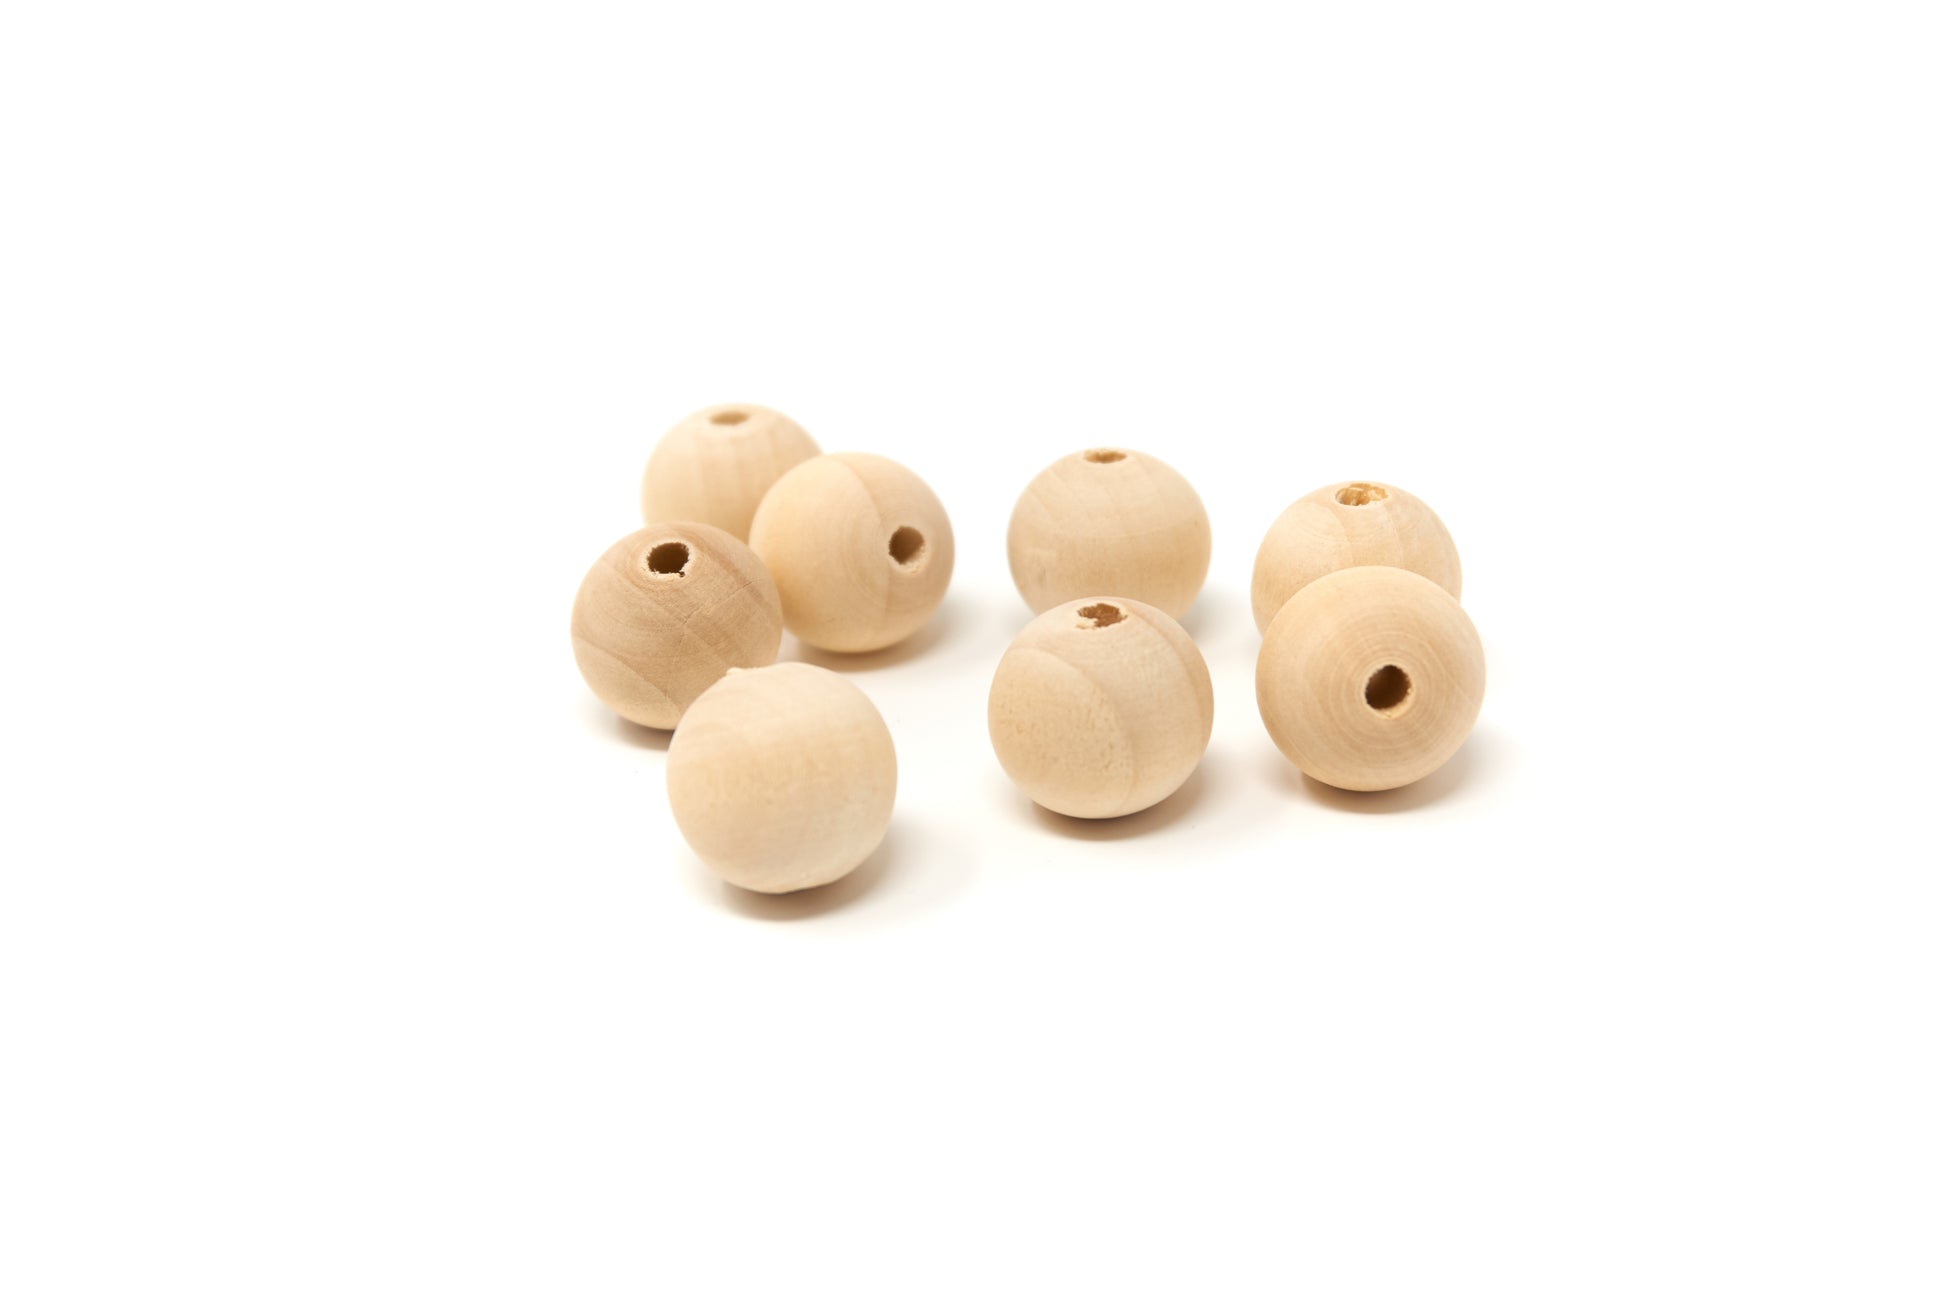 Natural Round Wood Beads 20mm 20 pieces - Cameos Art Shop